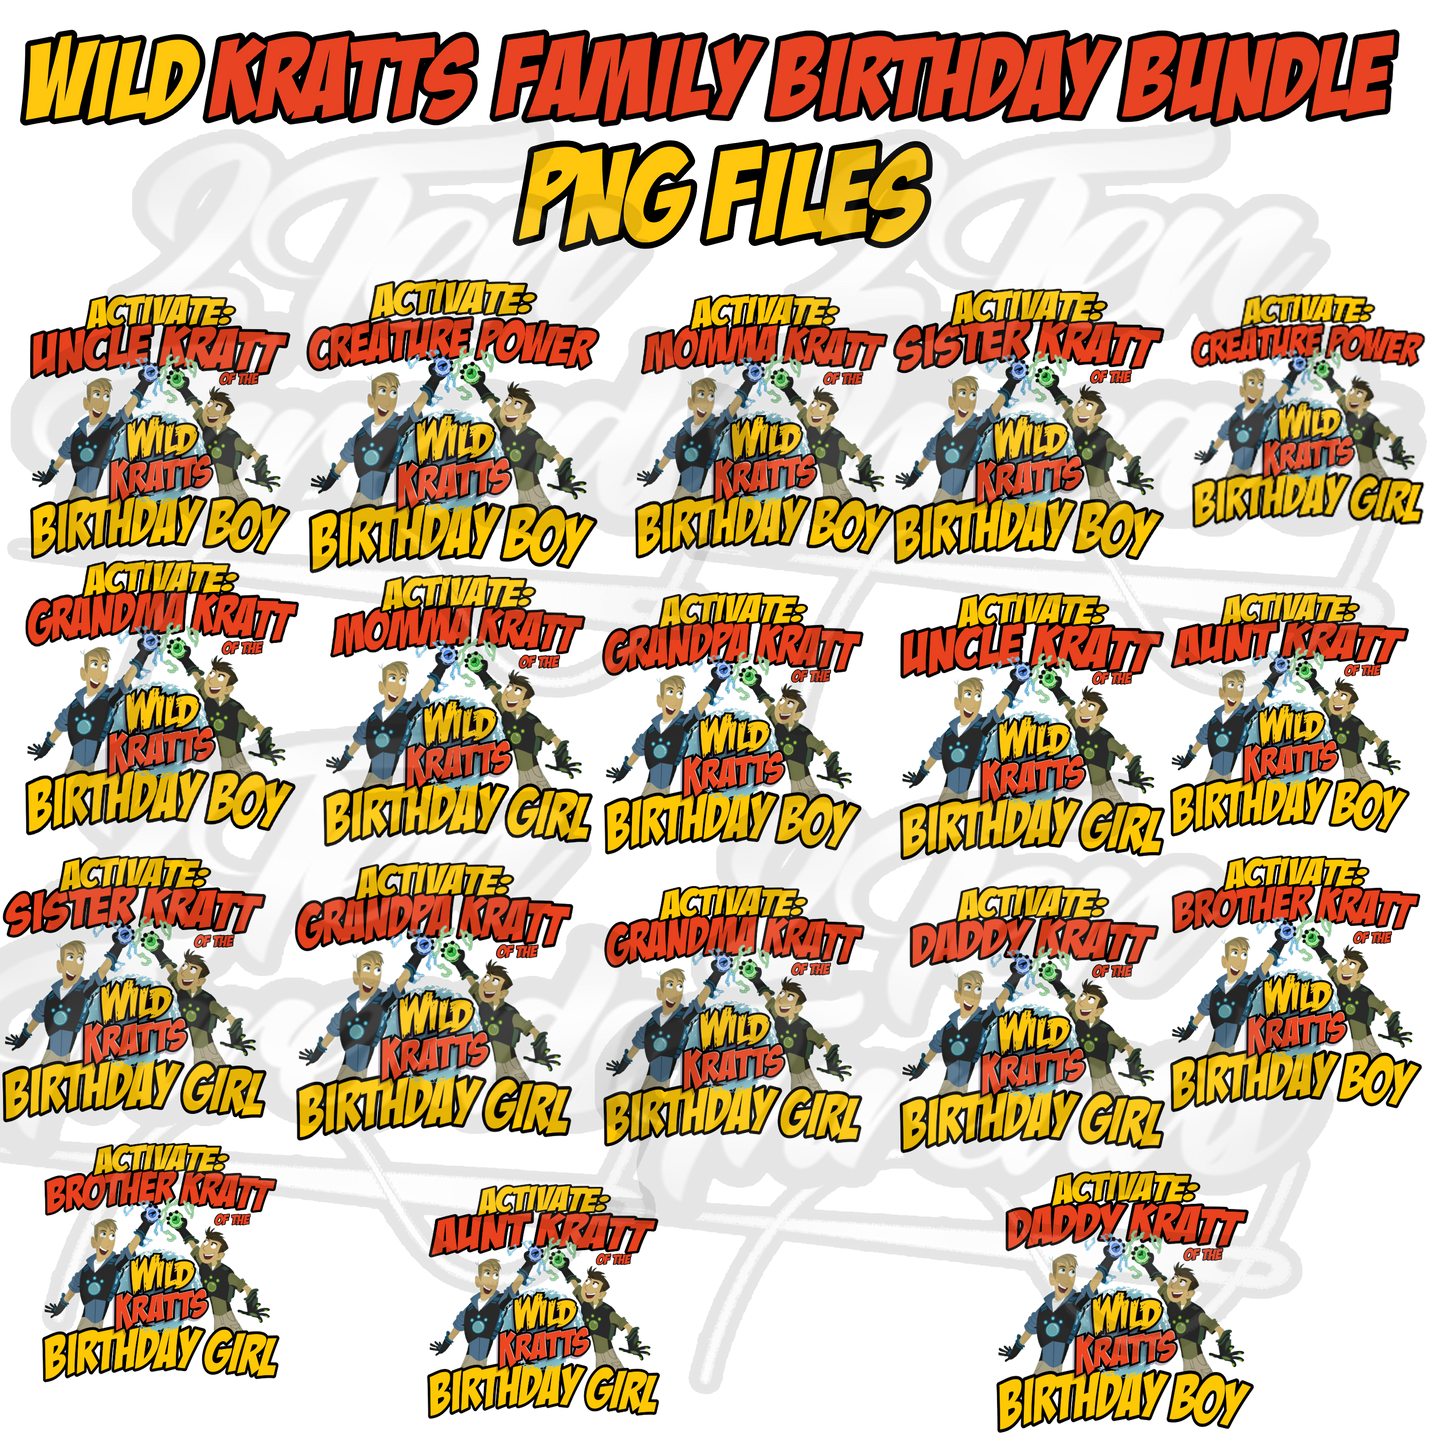 Custom Wild Kratts Birthday Bundle for the Family PNG File!